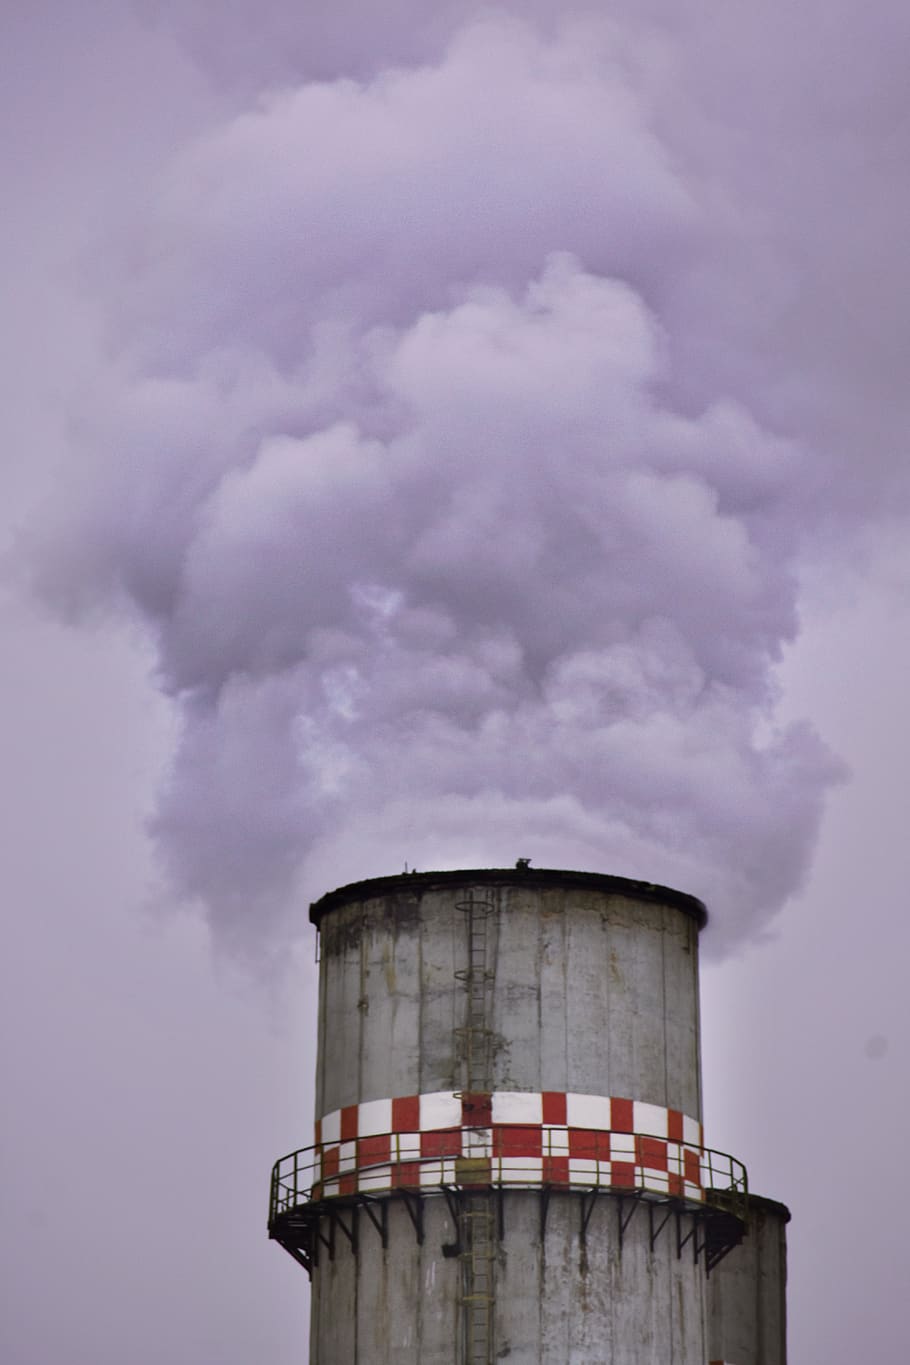 Factory Chimney Producing Smoke, air pollution, industrial plant